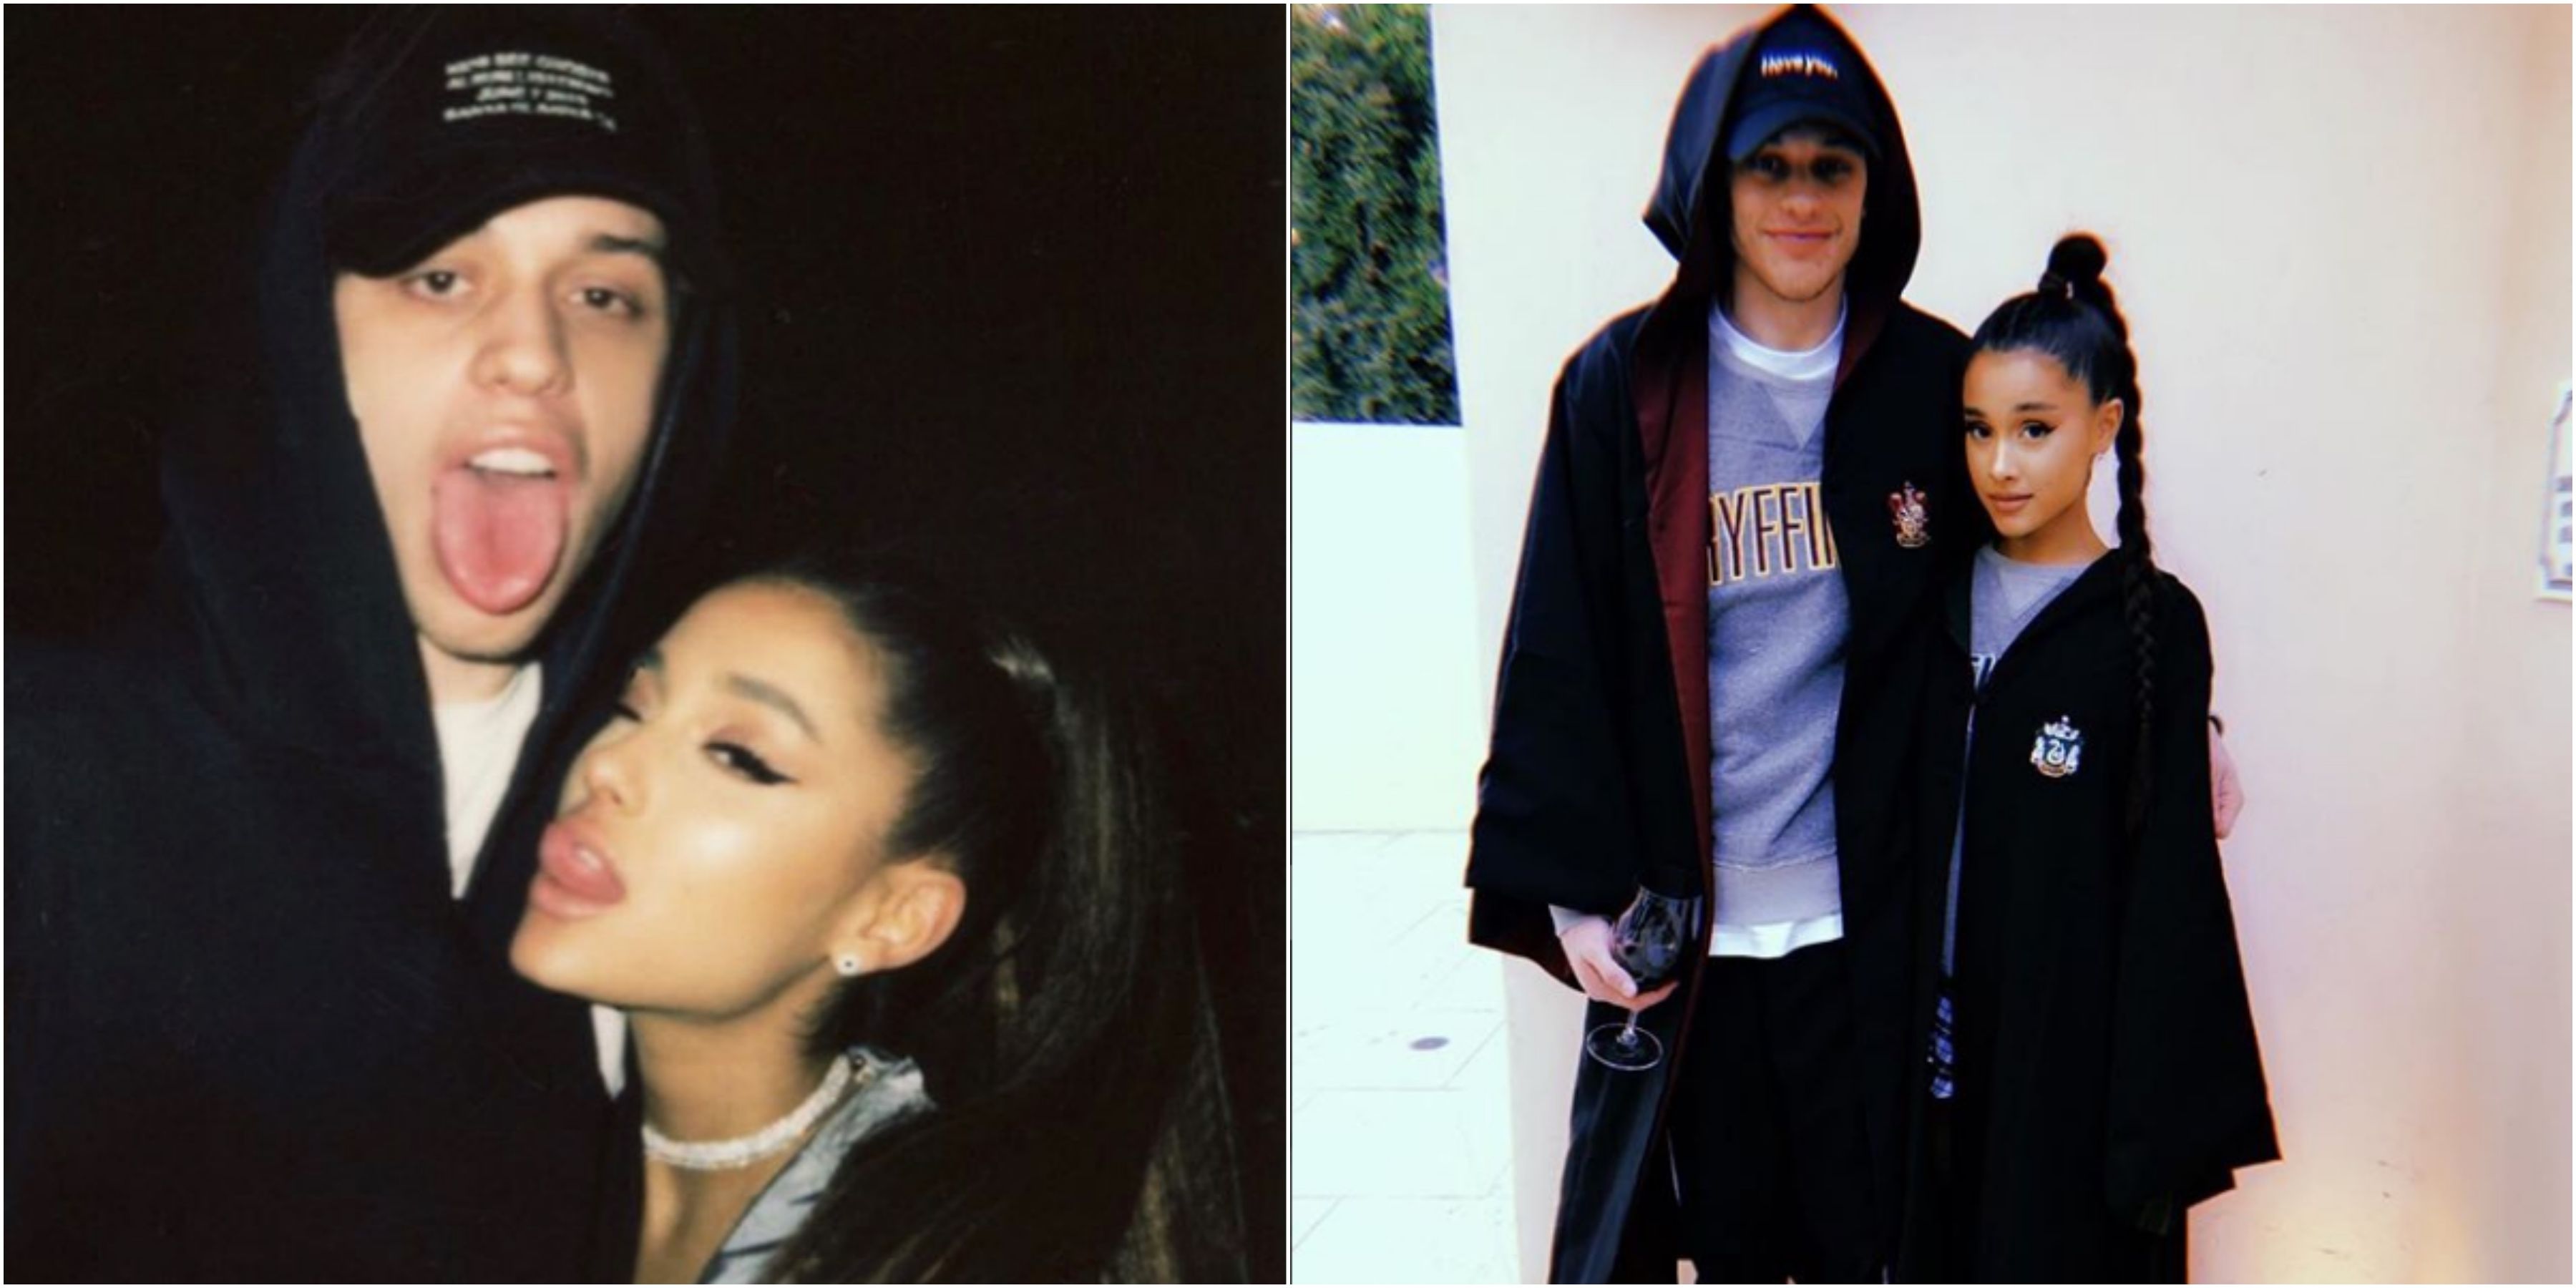 Ariana Grande And Pete Davidson A Relationship Timeline Of Their Whirlwind Romance pic